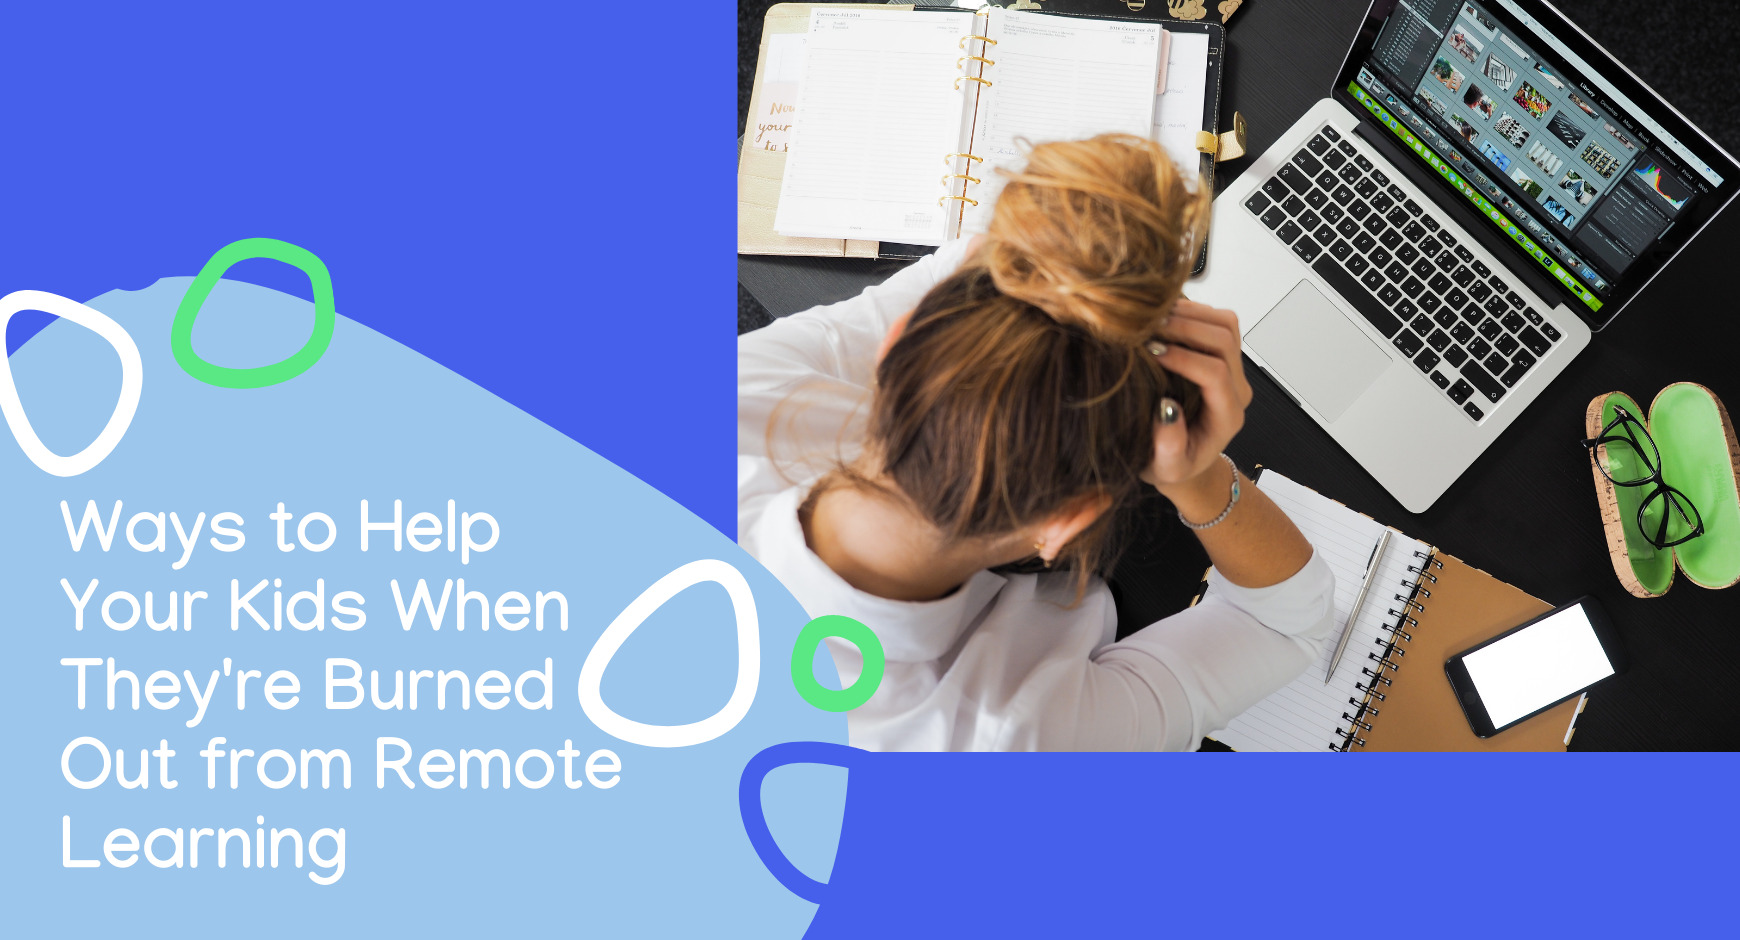 A woman holding her head in frsutration in front of a laptop next to words that read " Ways to Help Your Kids When They're Burned Out from Remote Learning" 